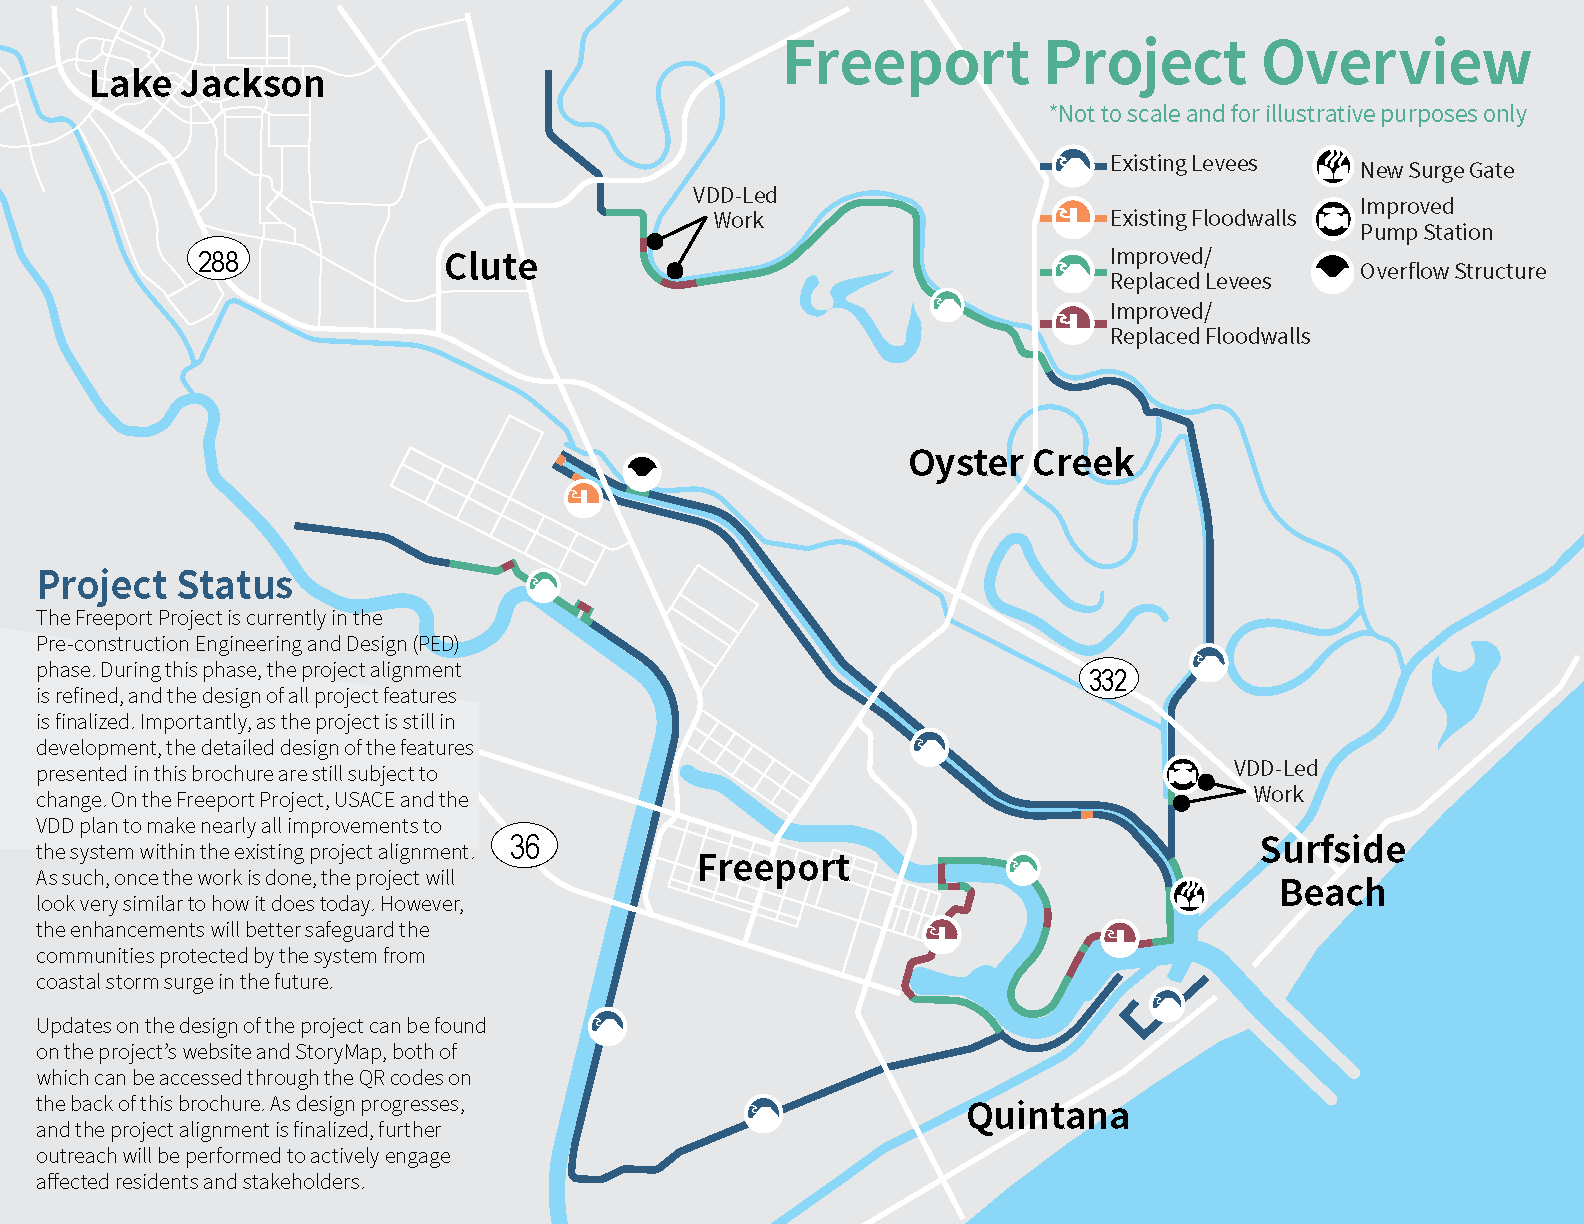 Freeport Project Overview